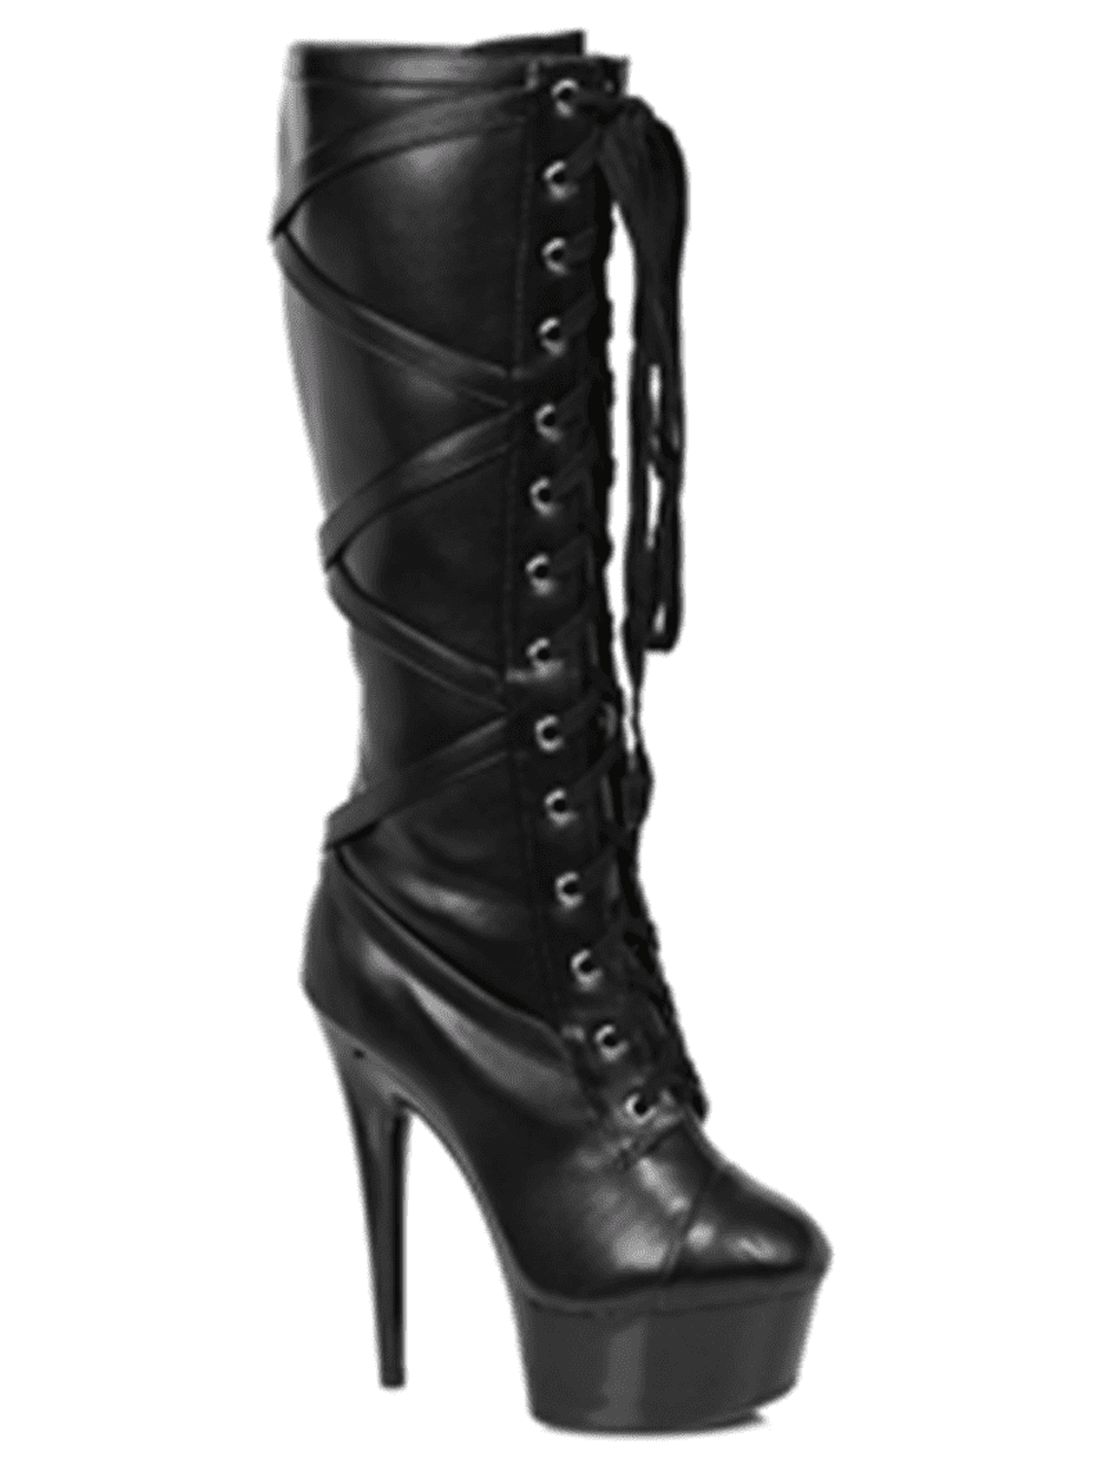 609-POCKY, 6" Lace Up Platform Boot With Inner Pocket - image 1 of 2